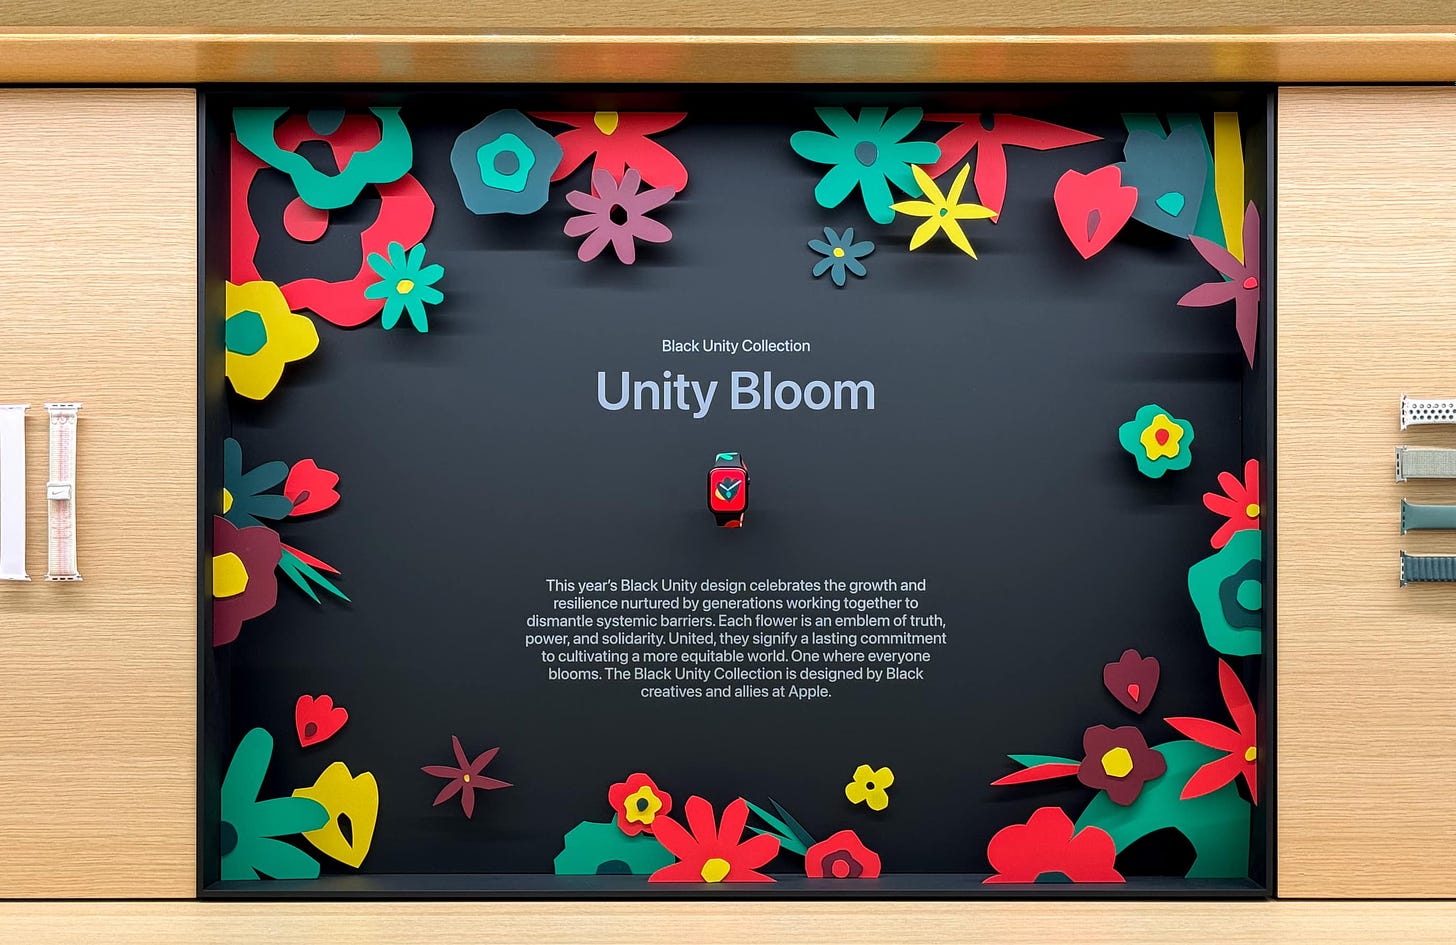 The Apple Watch Unity Bloom bay. Floral patterns are set against a black background.